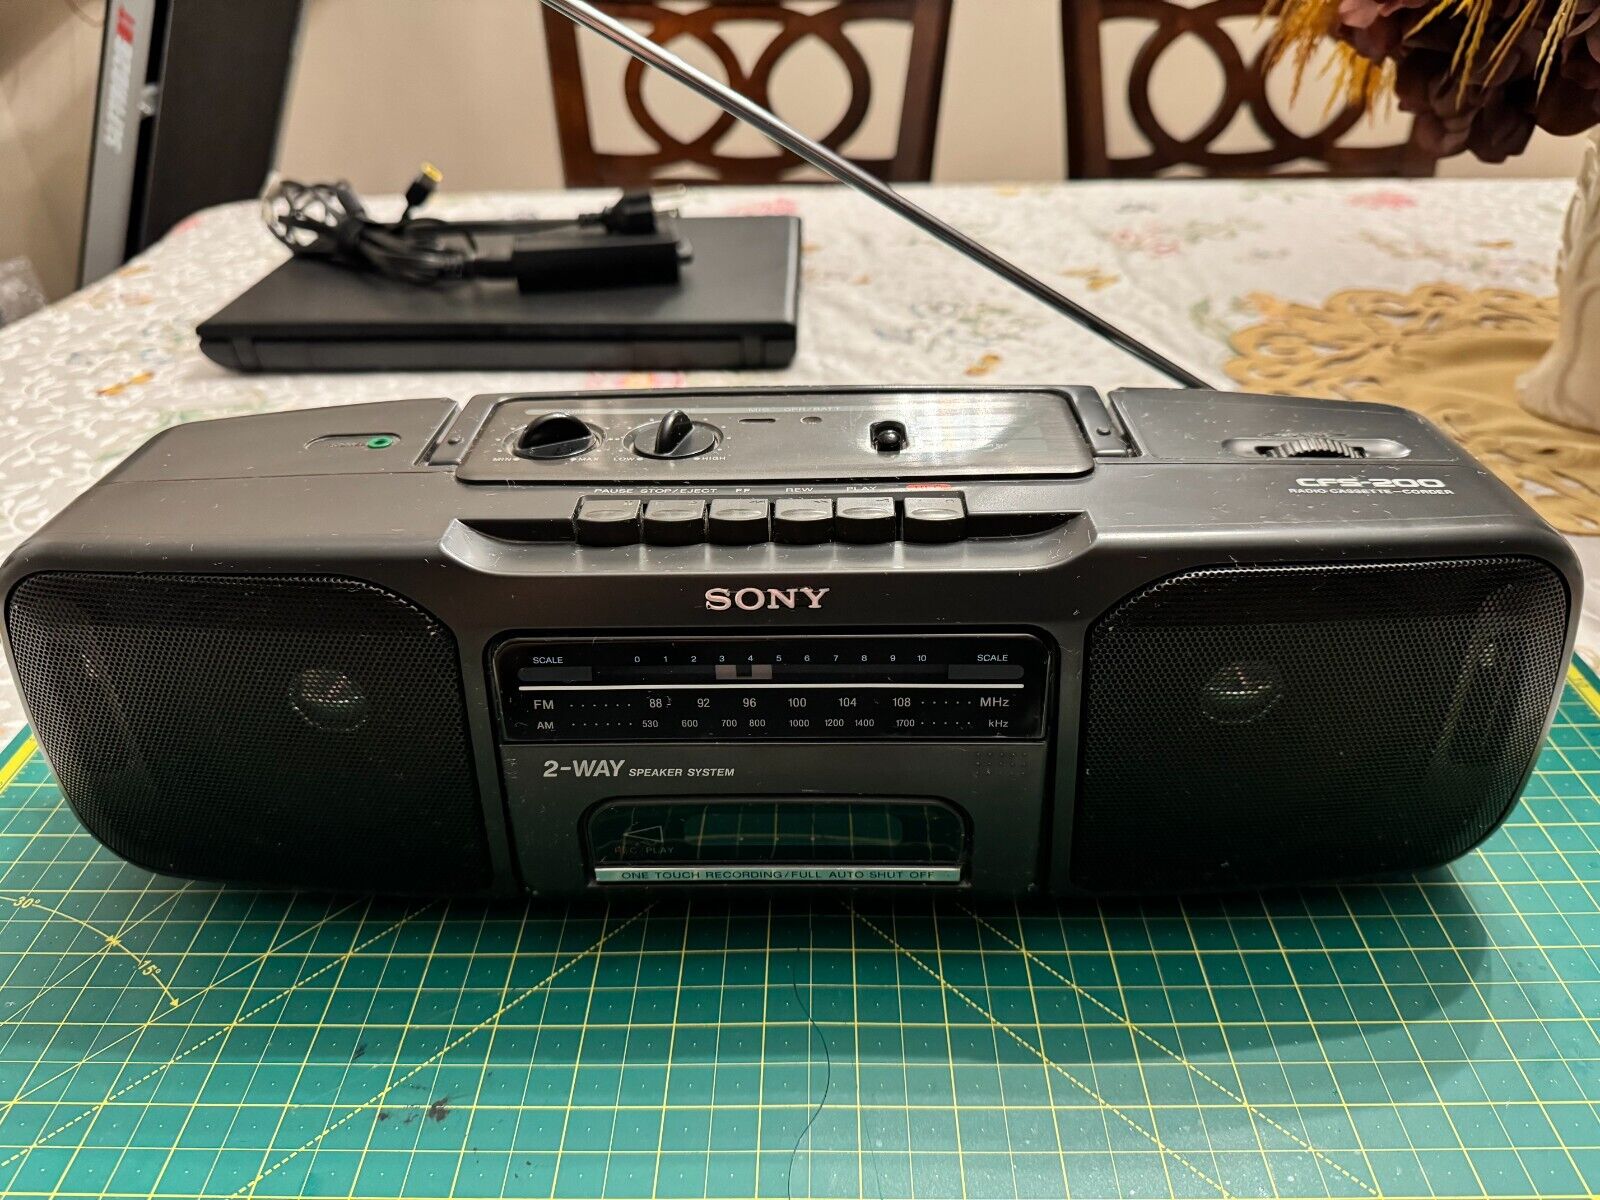 Tested Sony CFS-200 Stereo FM/AM Radio Cassette Recorder Vintage Boombox